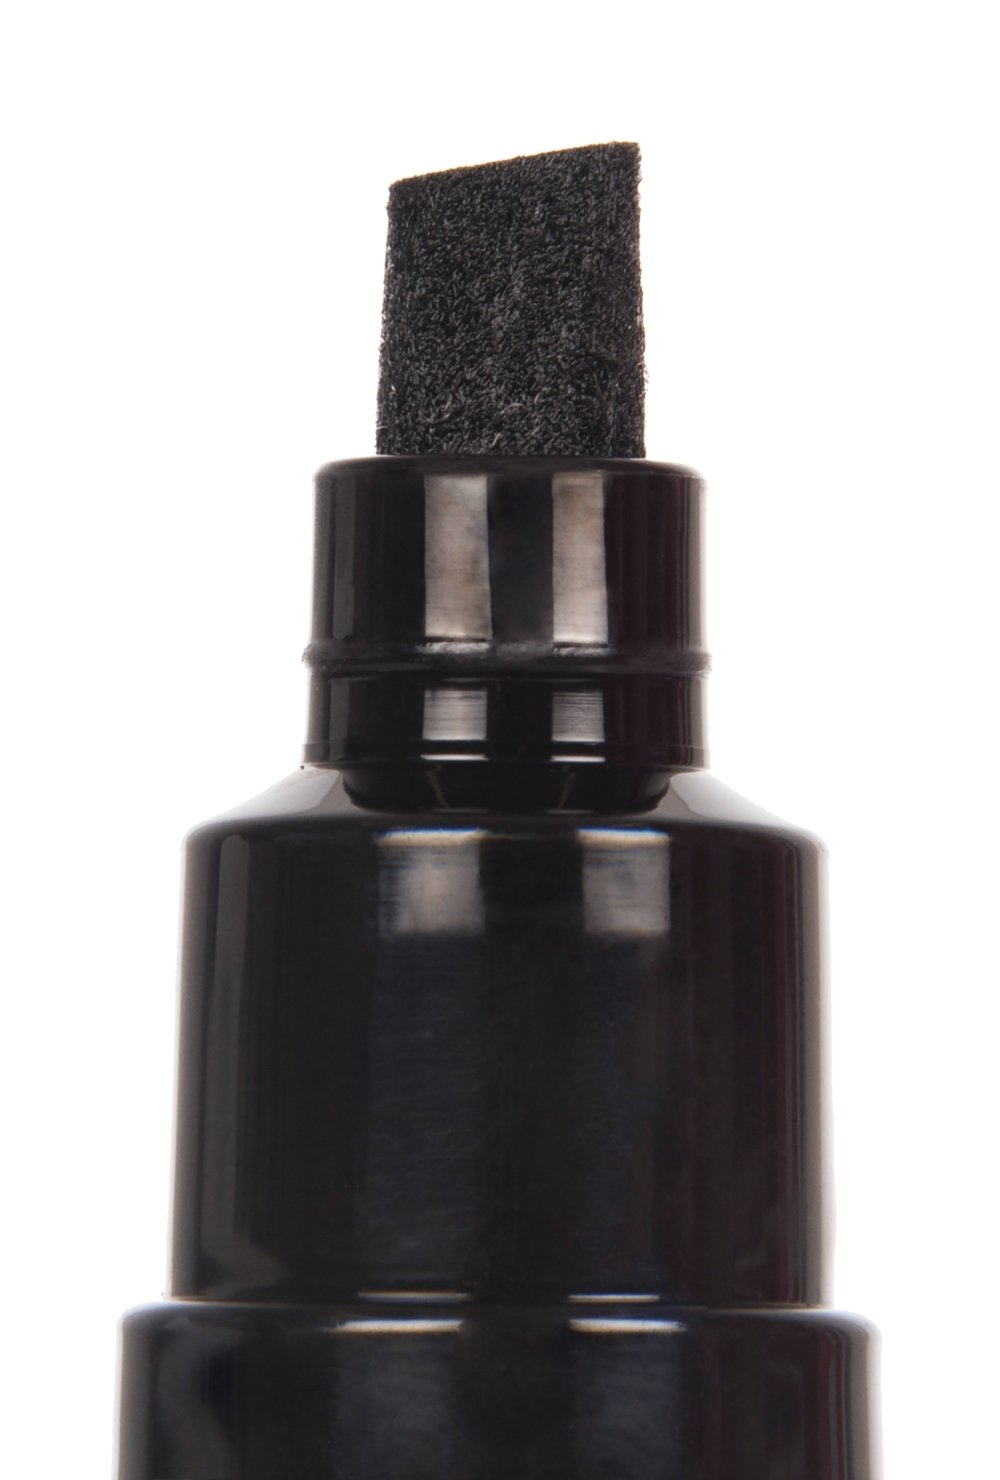 Check out our website to find the best Posca Bold Chisel Tip Black 959 at  an unbeatable price